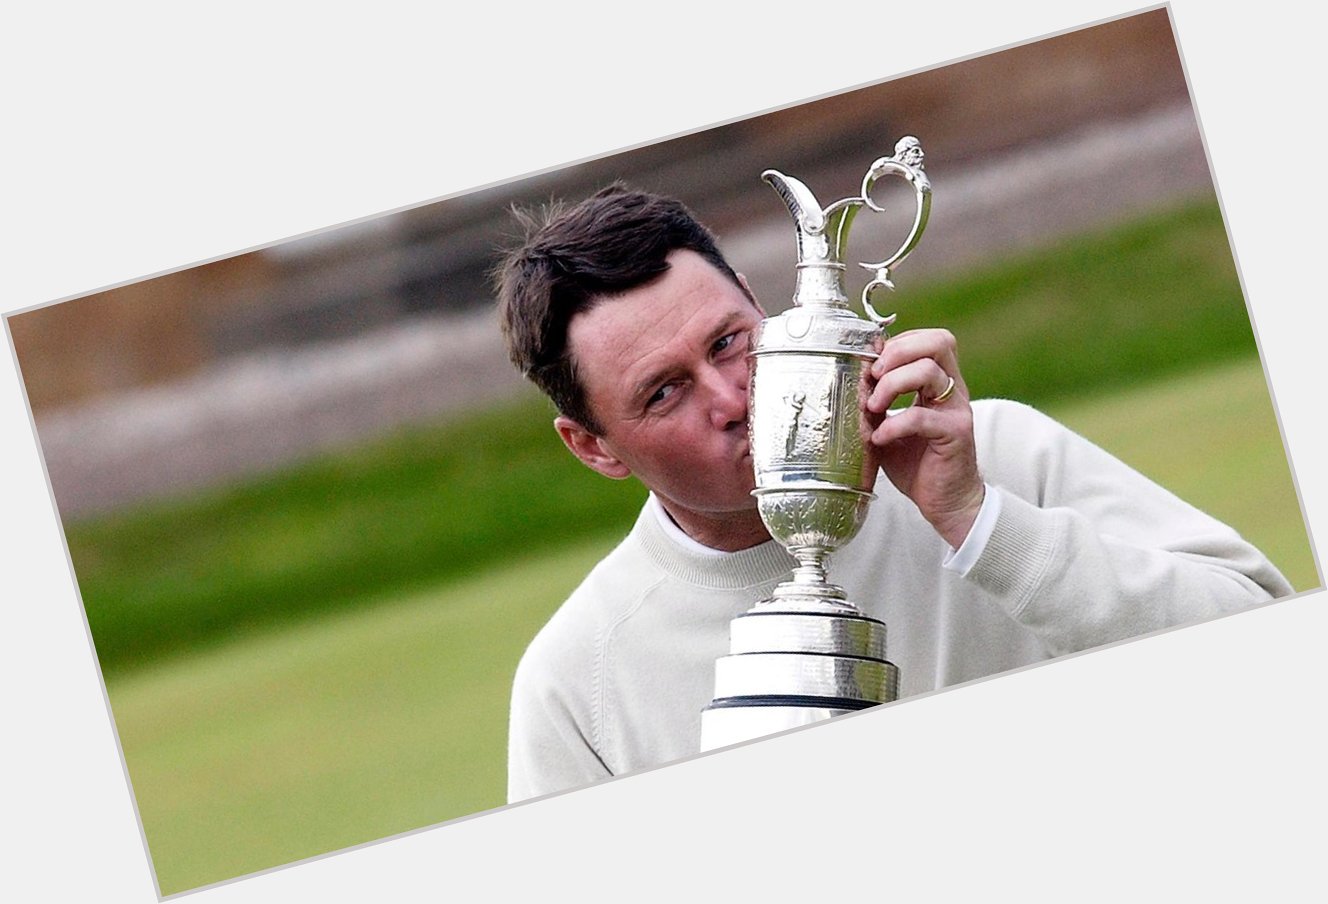 Happy 50th Birthday to Todd Hamilton, winner of the 133rd Open Championship at Royal Troon, 2004. 